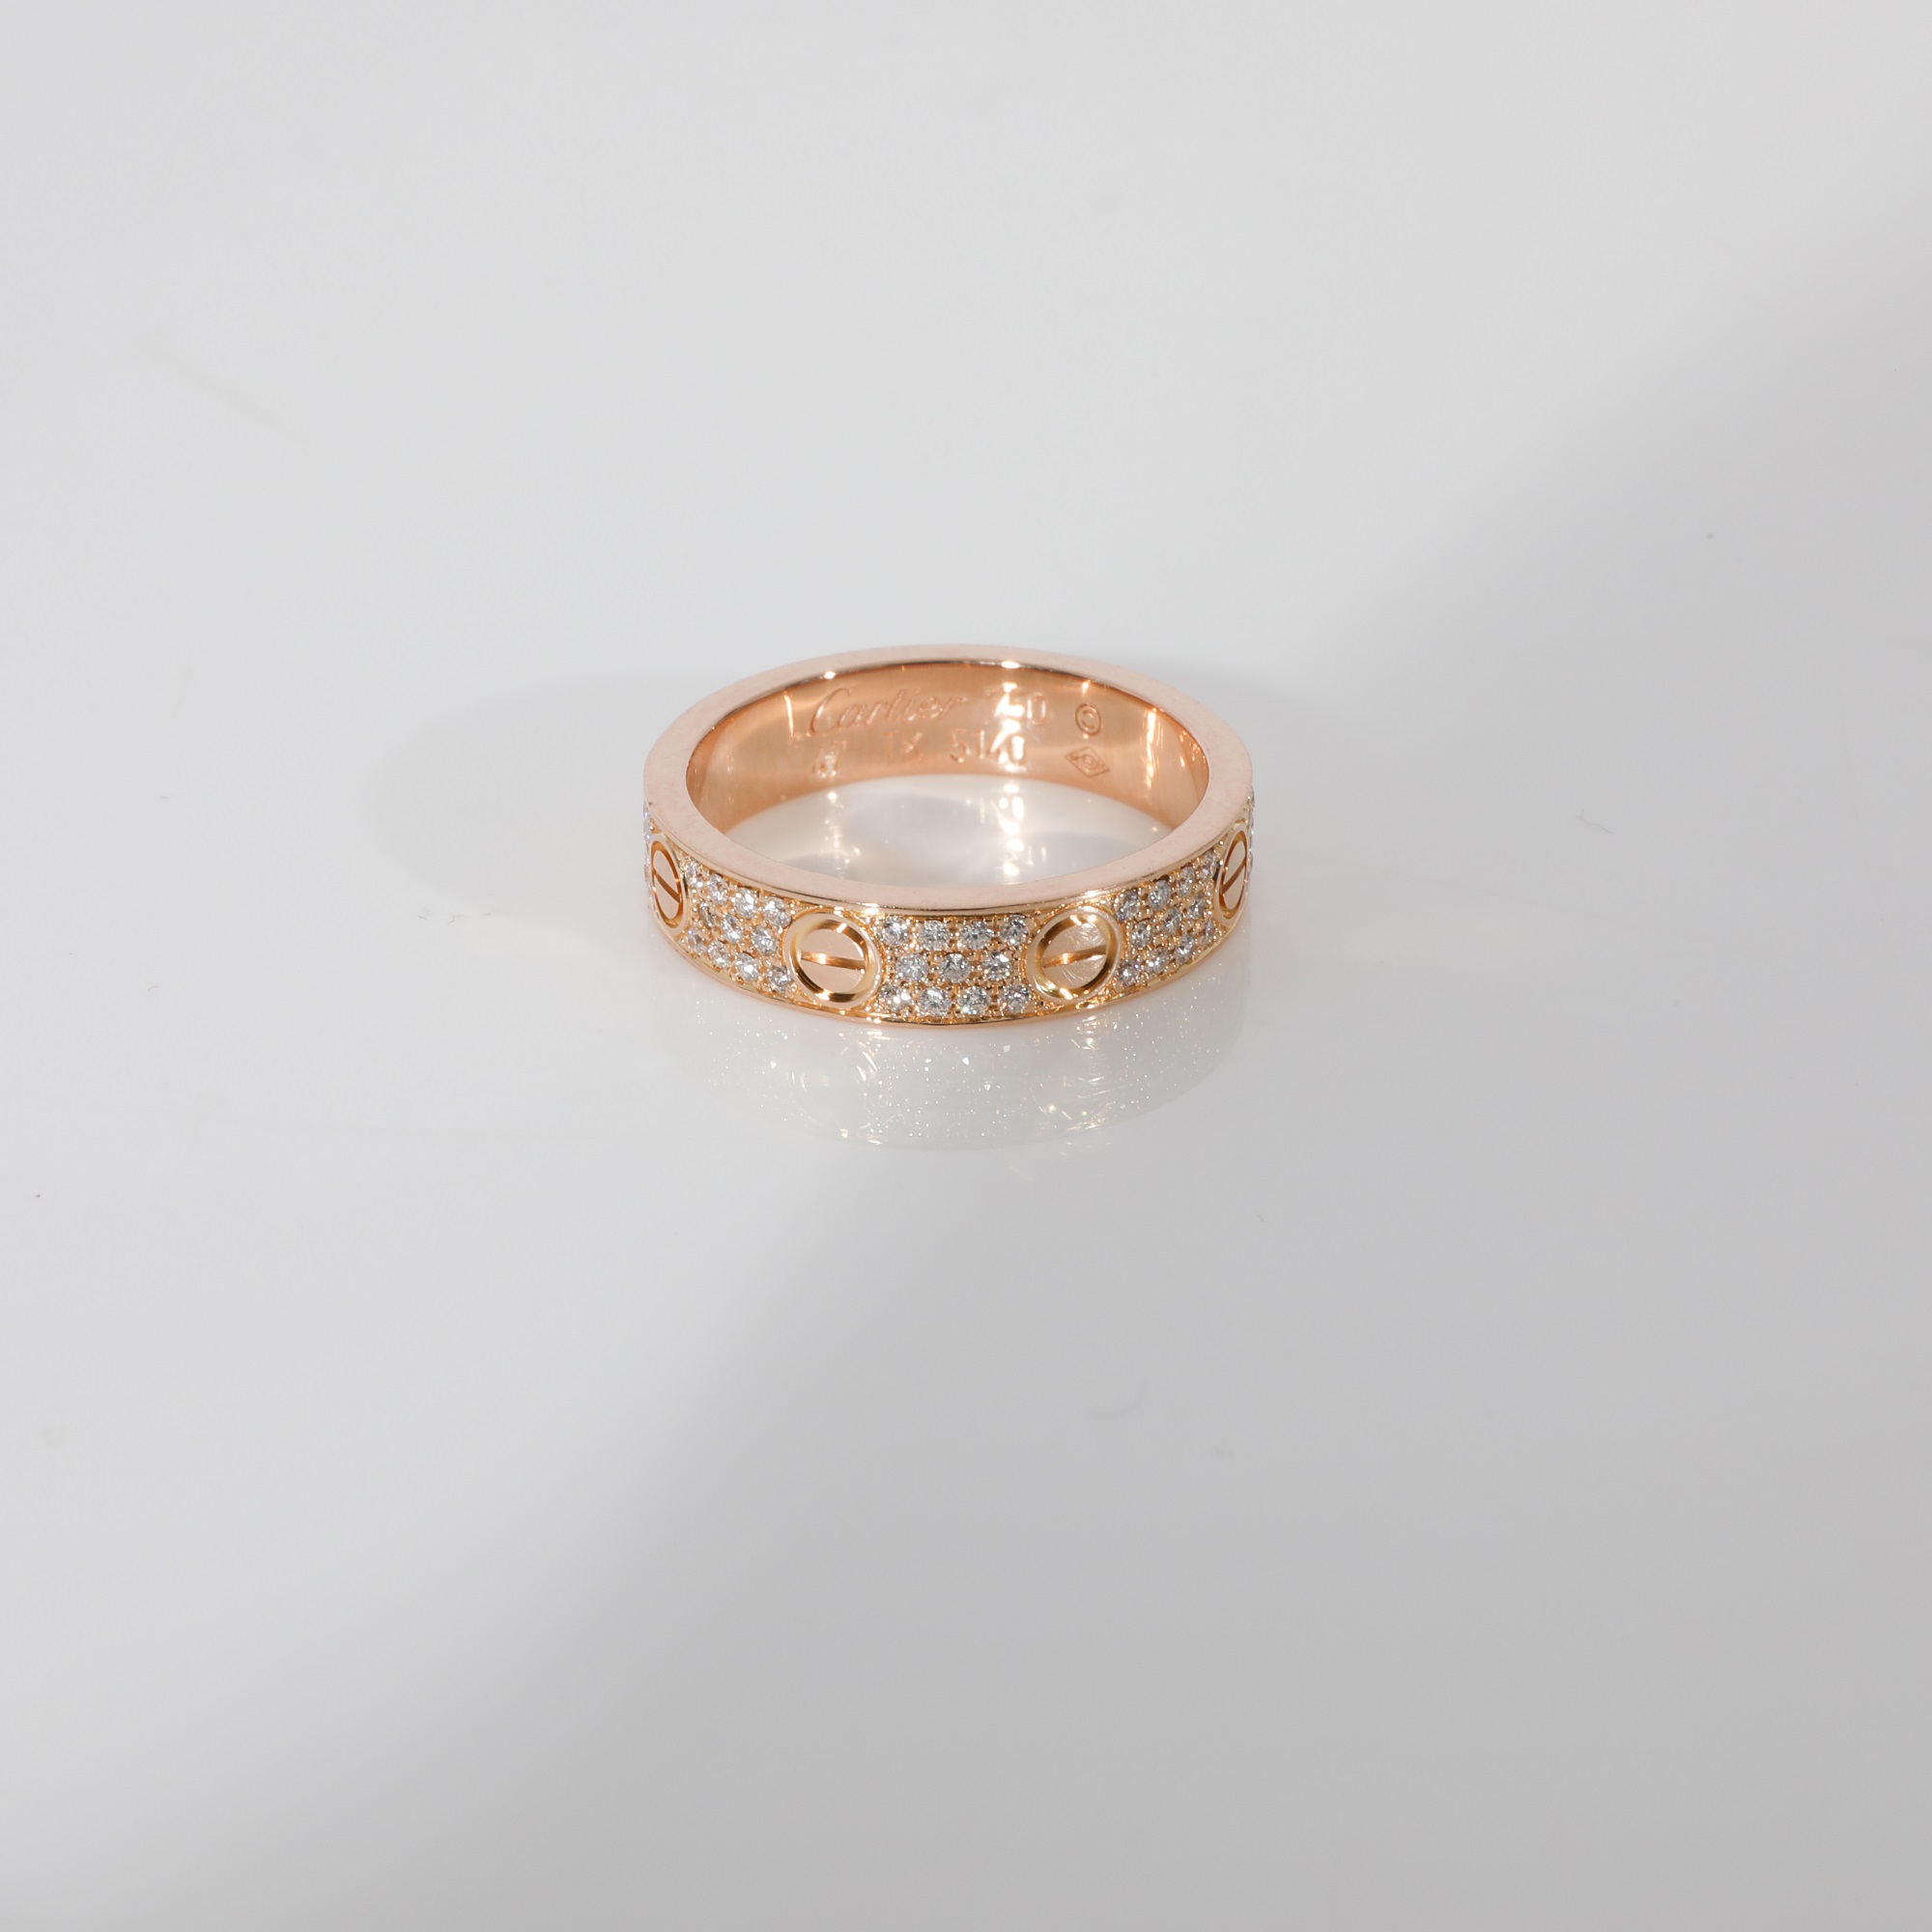 Cartier Love Diamond Pave Band In 18k Rose Gold 0.31 CTW Ring US 4